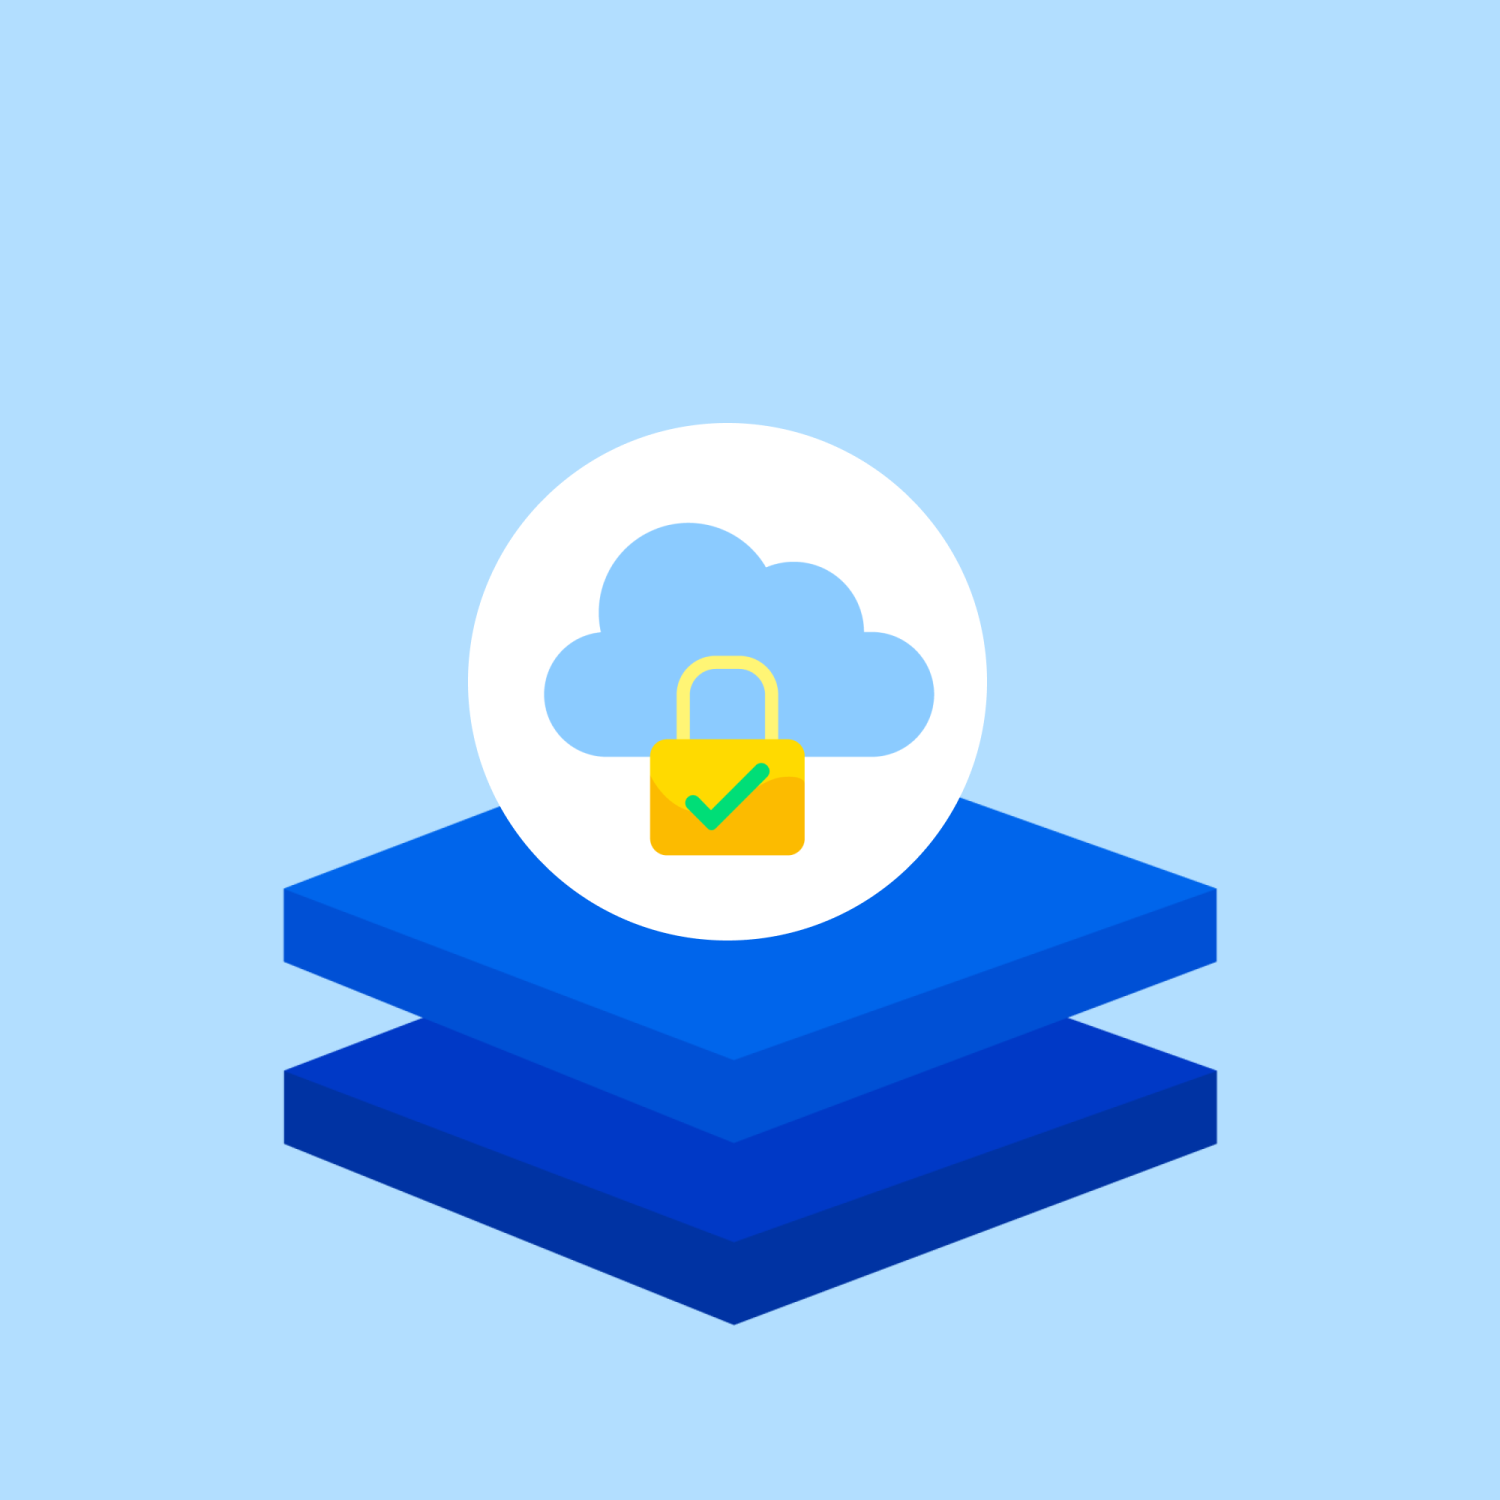 An illustration showing cloud service icon atop a layered tech stack